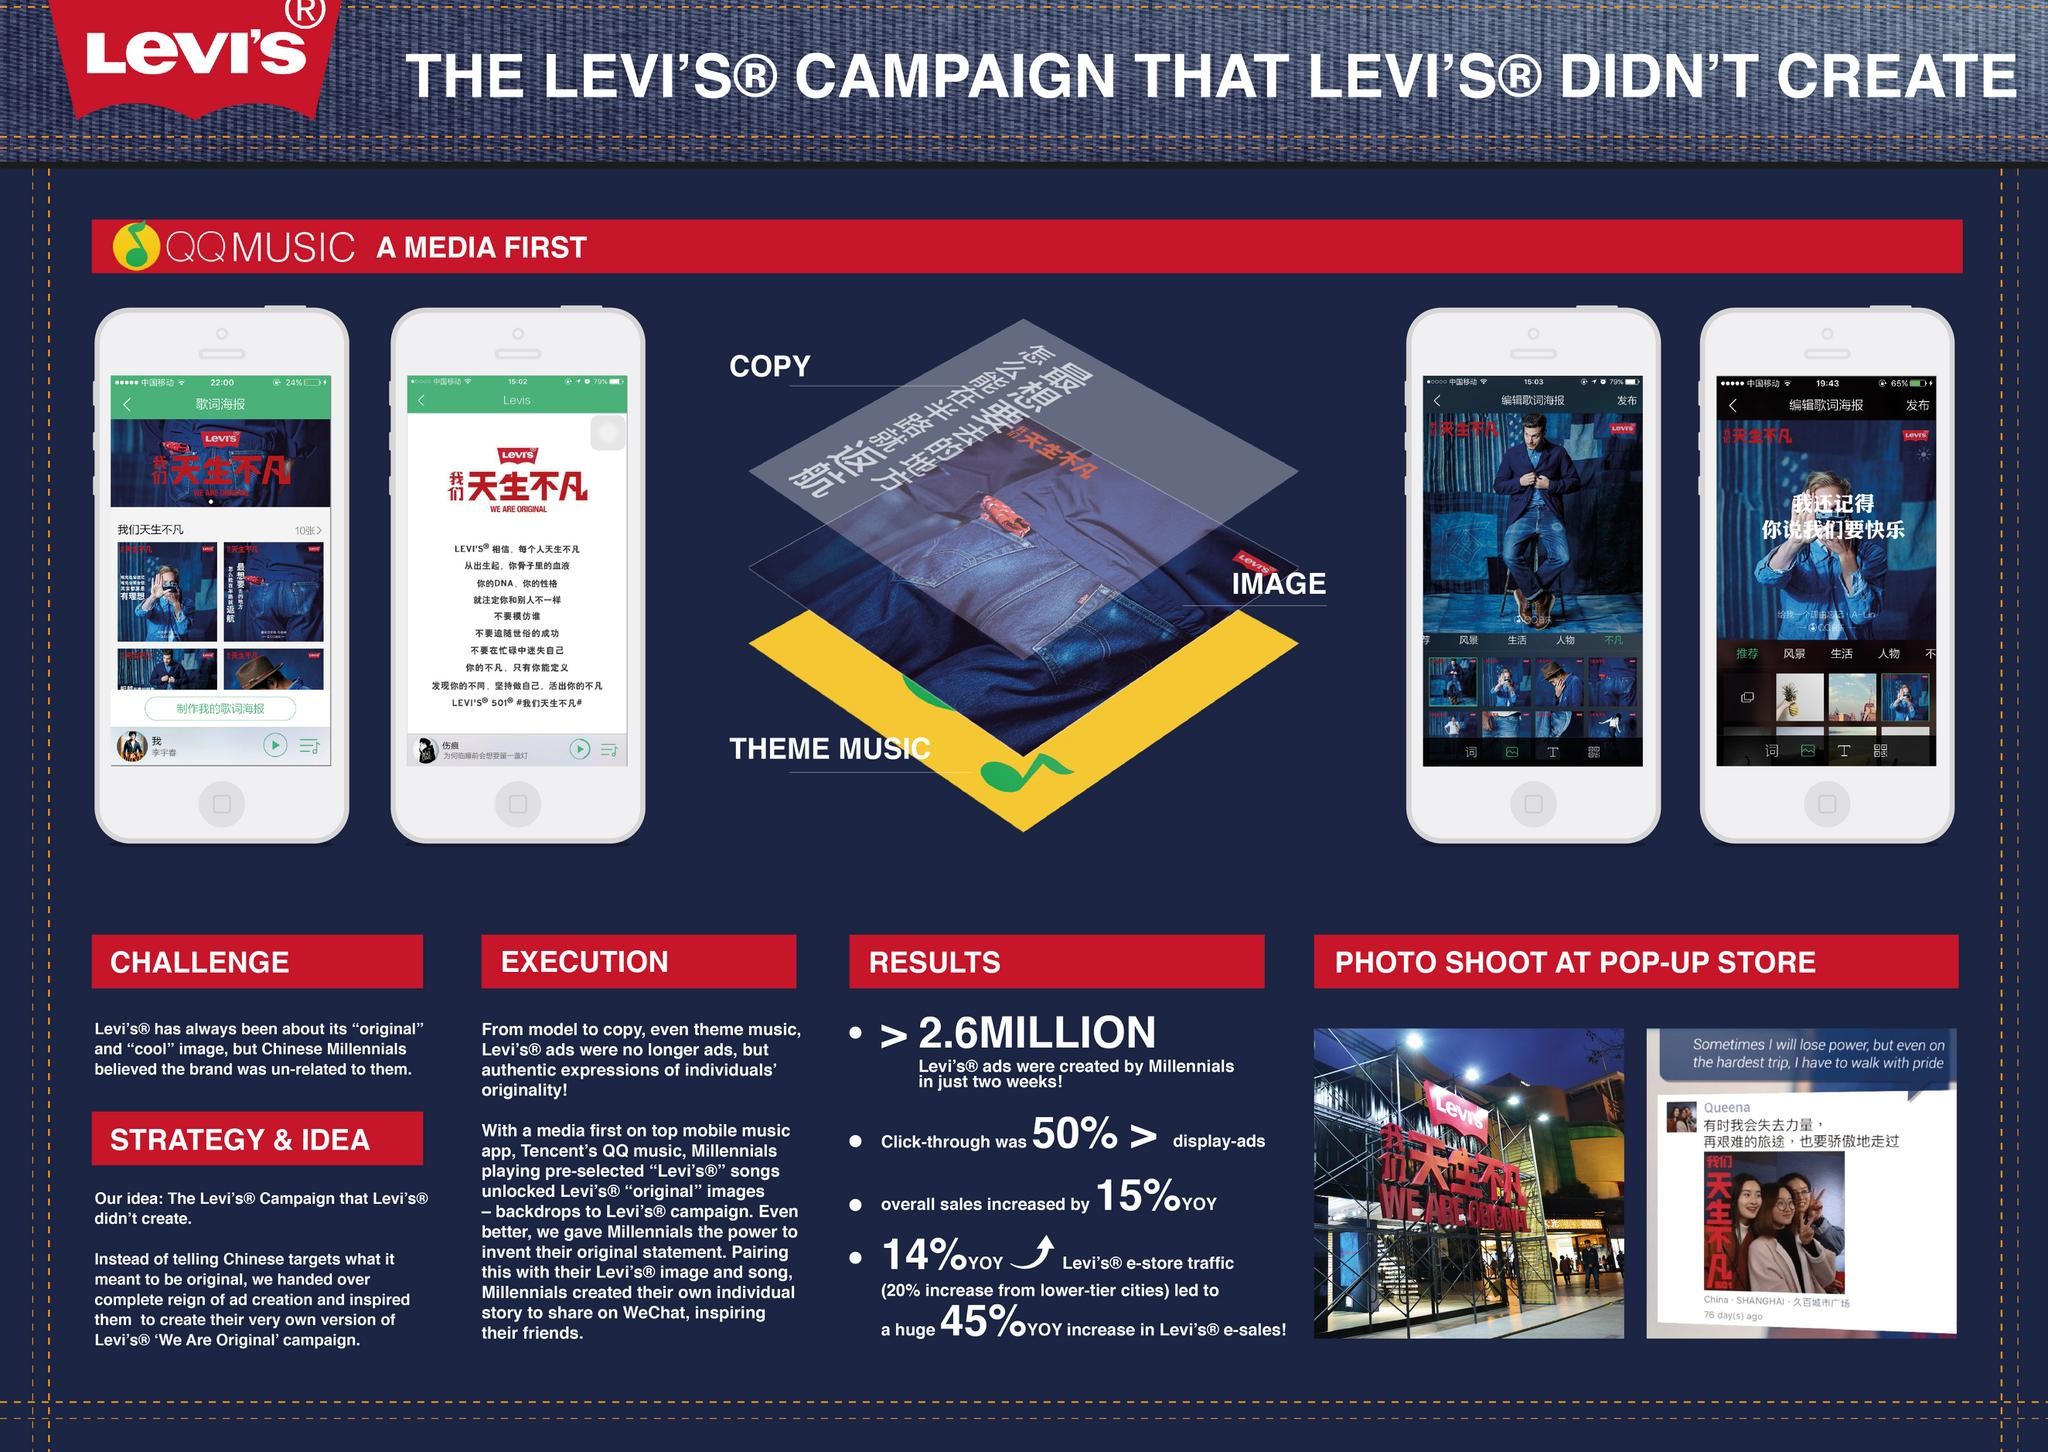 The Levi’s® Campaign that Levi’s® Didn't Create